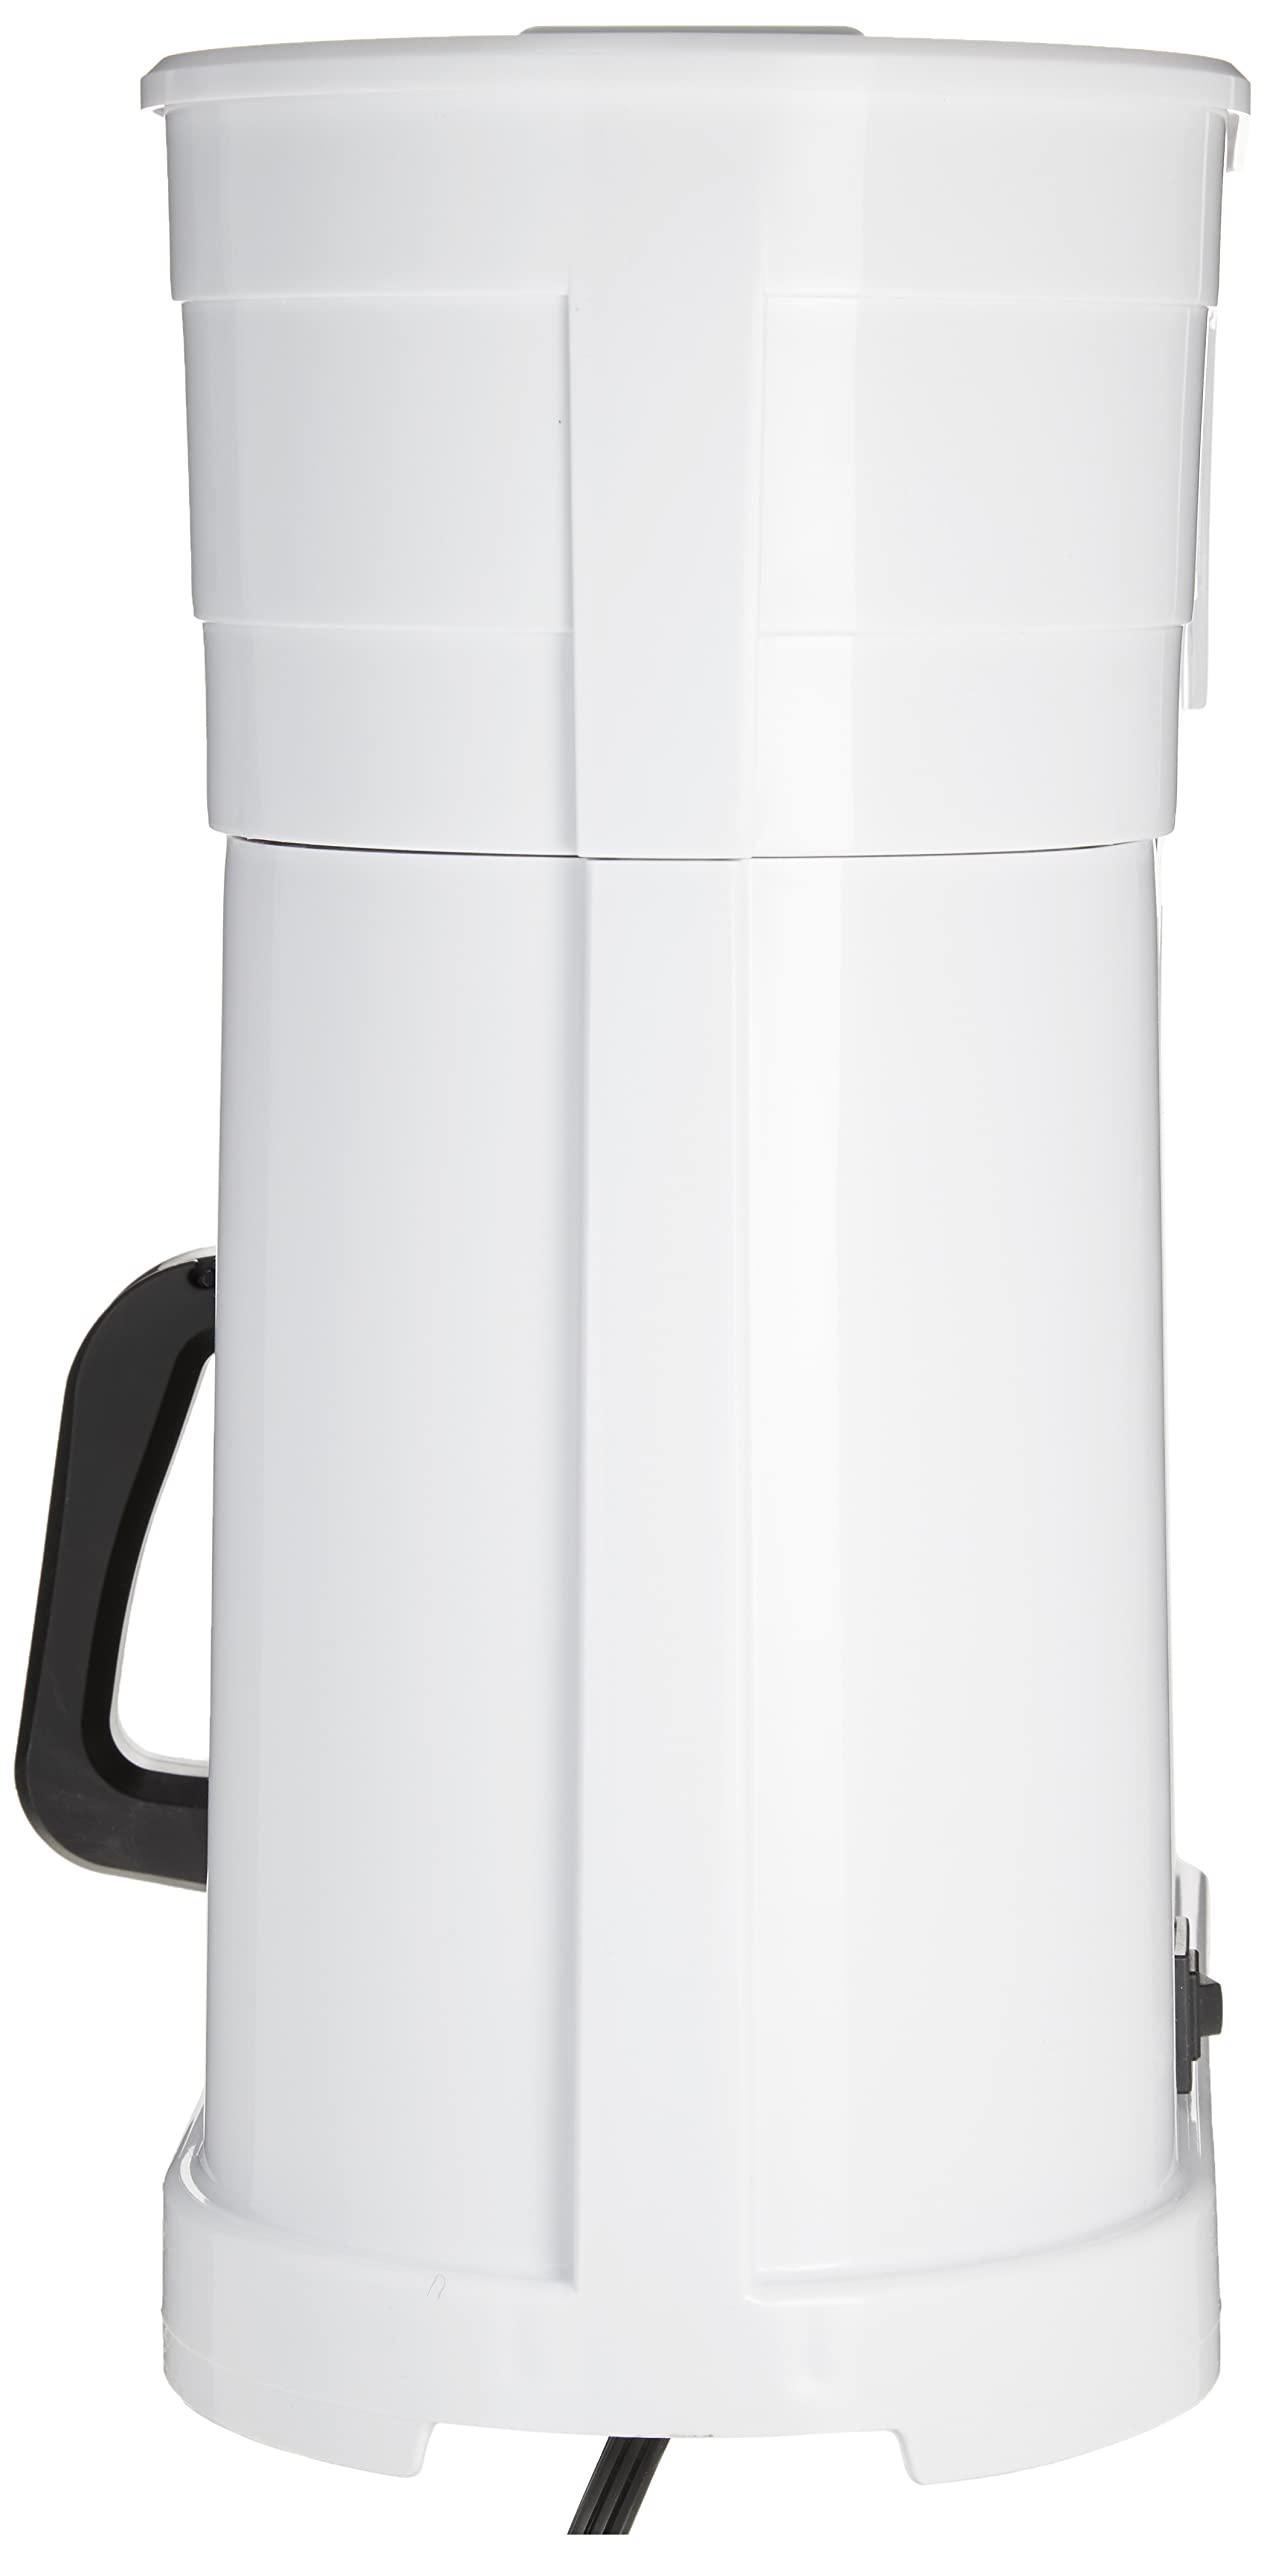 bunn grw velocity brew 10-cup home coffee brewer, white